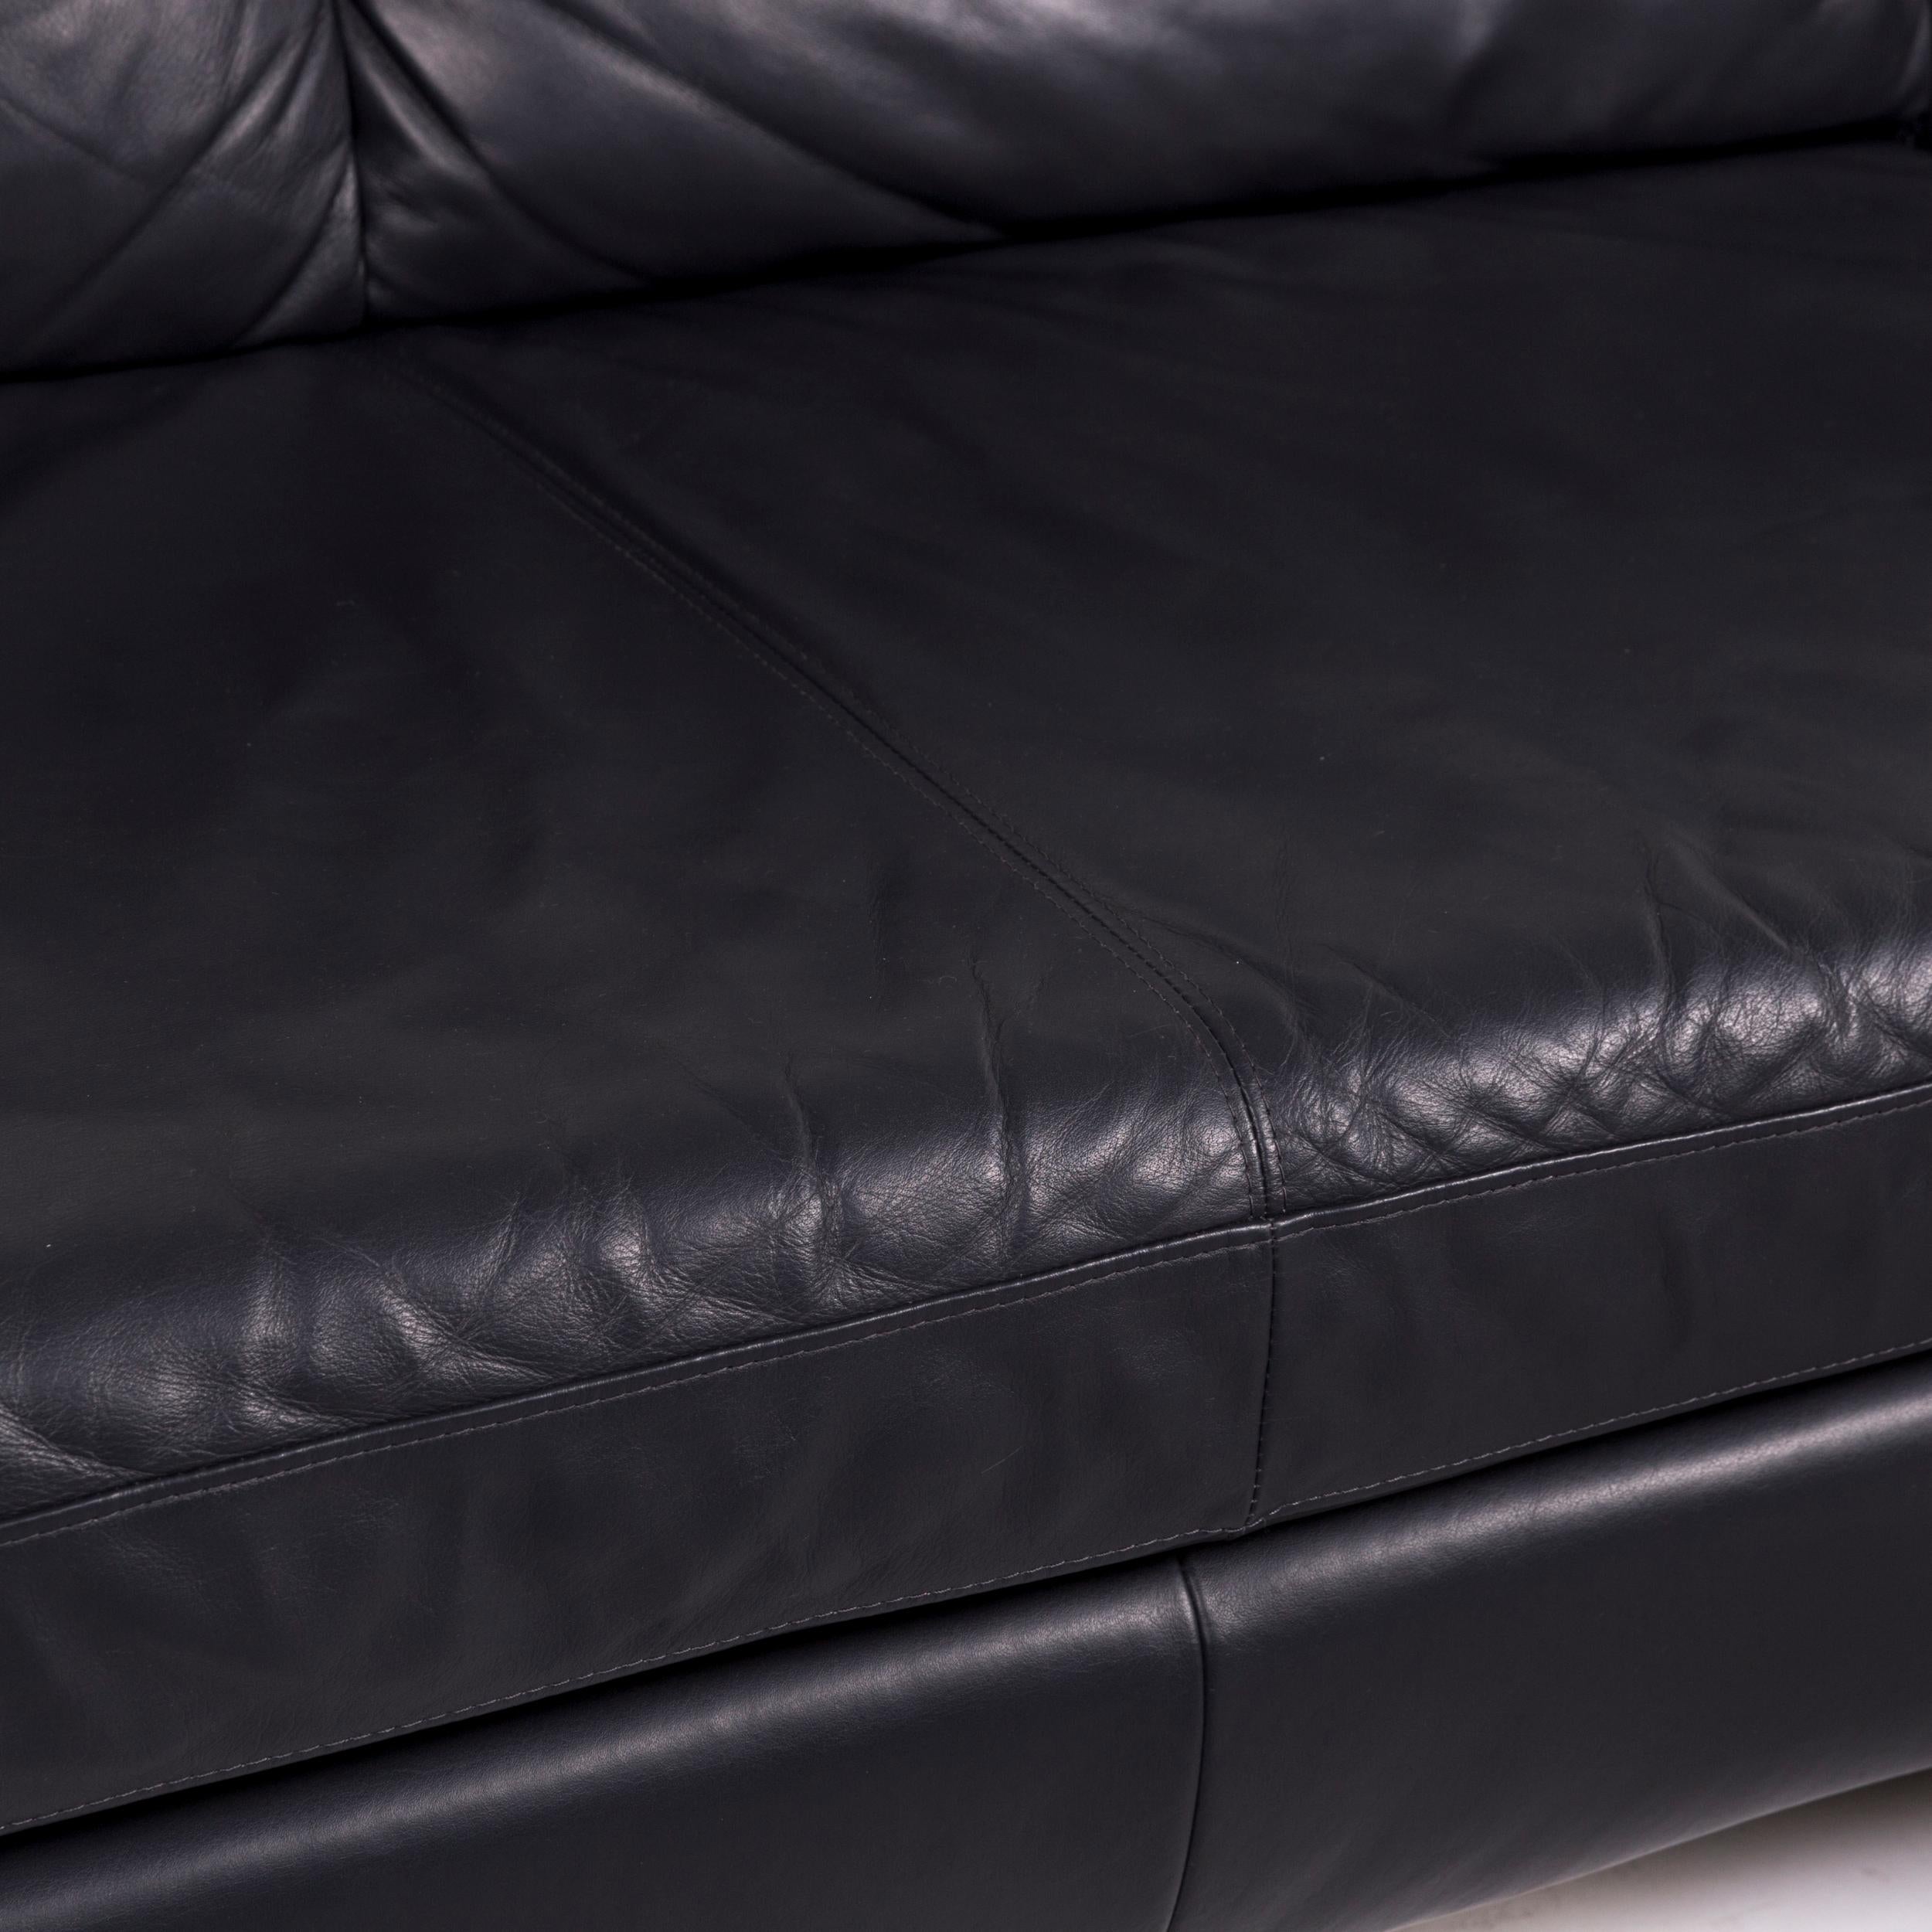 We bring to you a Willi Schillig leather corner sofa anthracite gray sofa couch.
 SKU: #12232
 

 Product Measurements in centimeters:
 

 depth: 90
 width: 206
 height: 81
 seat-height: 41
 rest-height: 66
 seat-depth: 51
 seat-width: